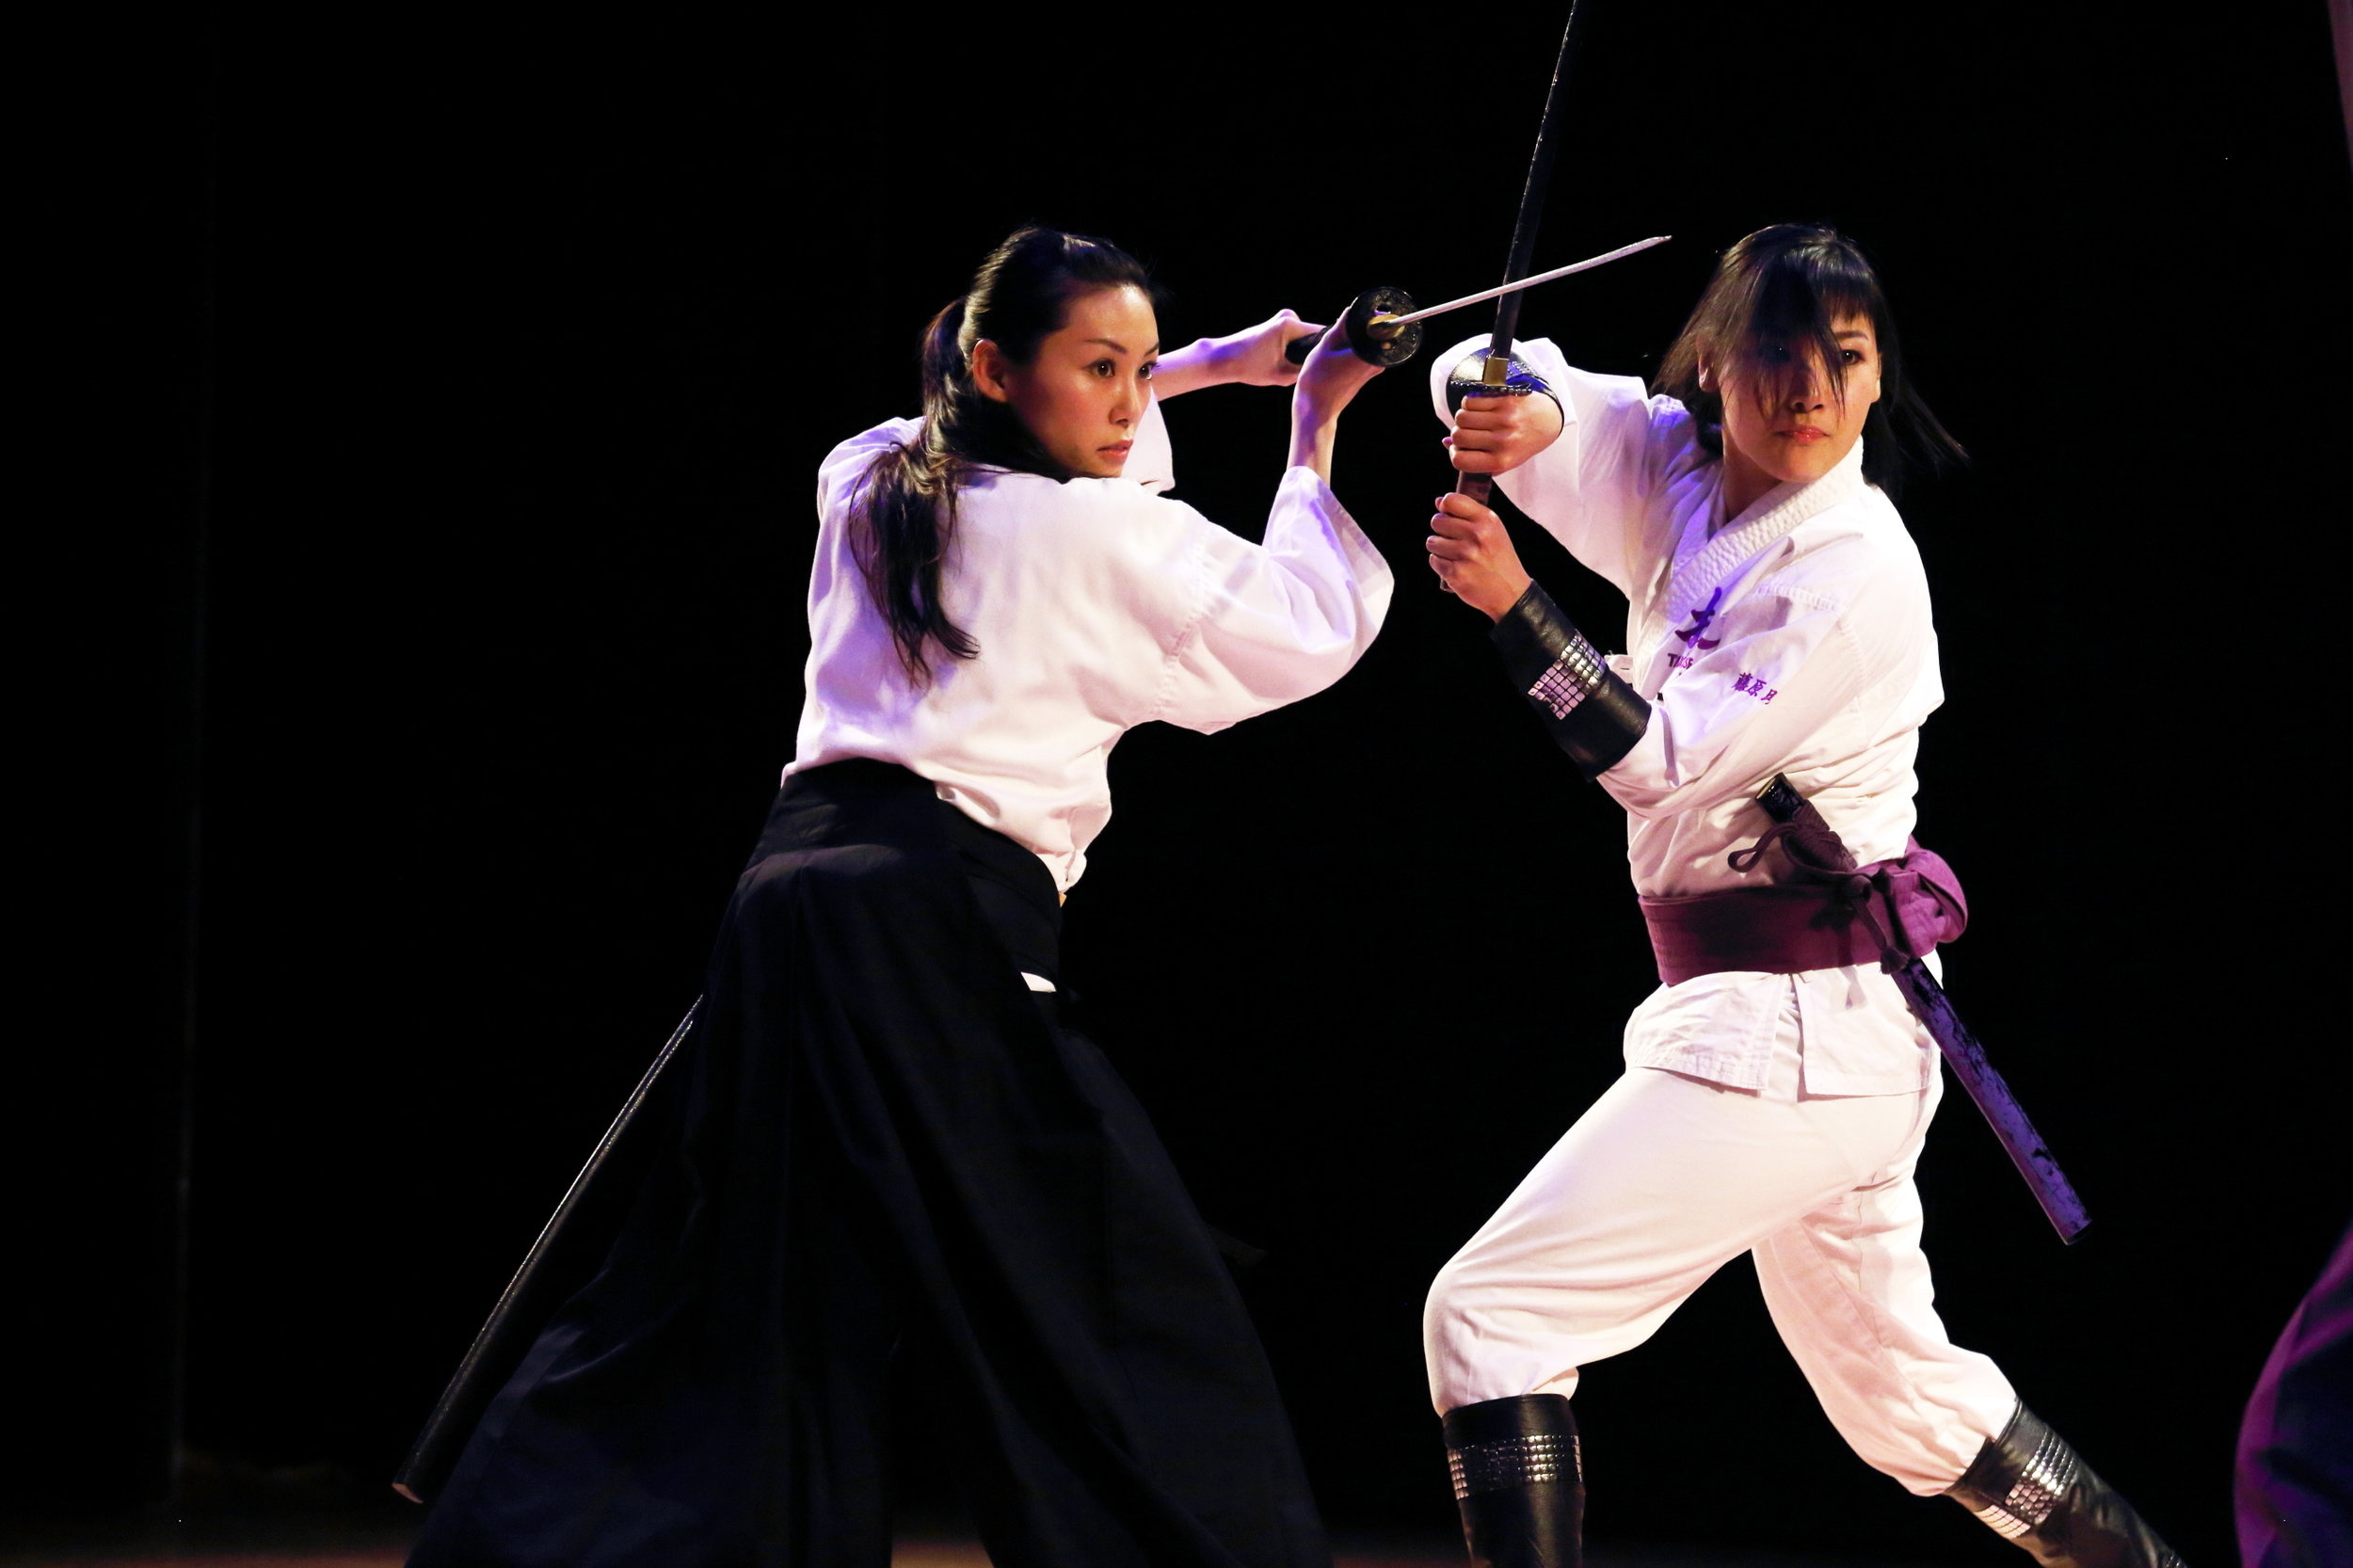 Sword Fighting: Dueling performance by women with katanas - Japanese two-handed swords. 2500x1670 HD Wallpaper.